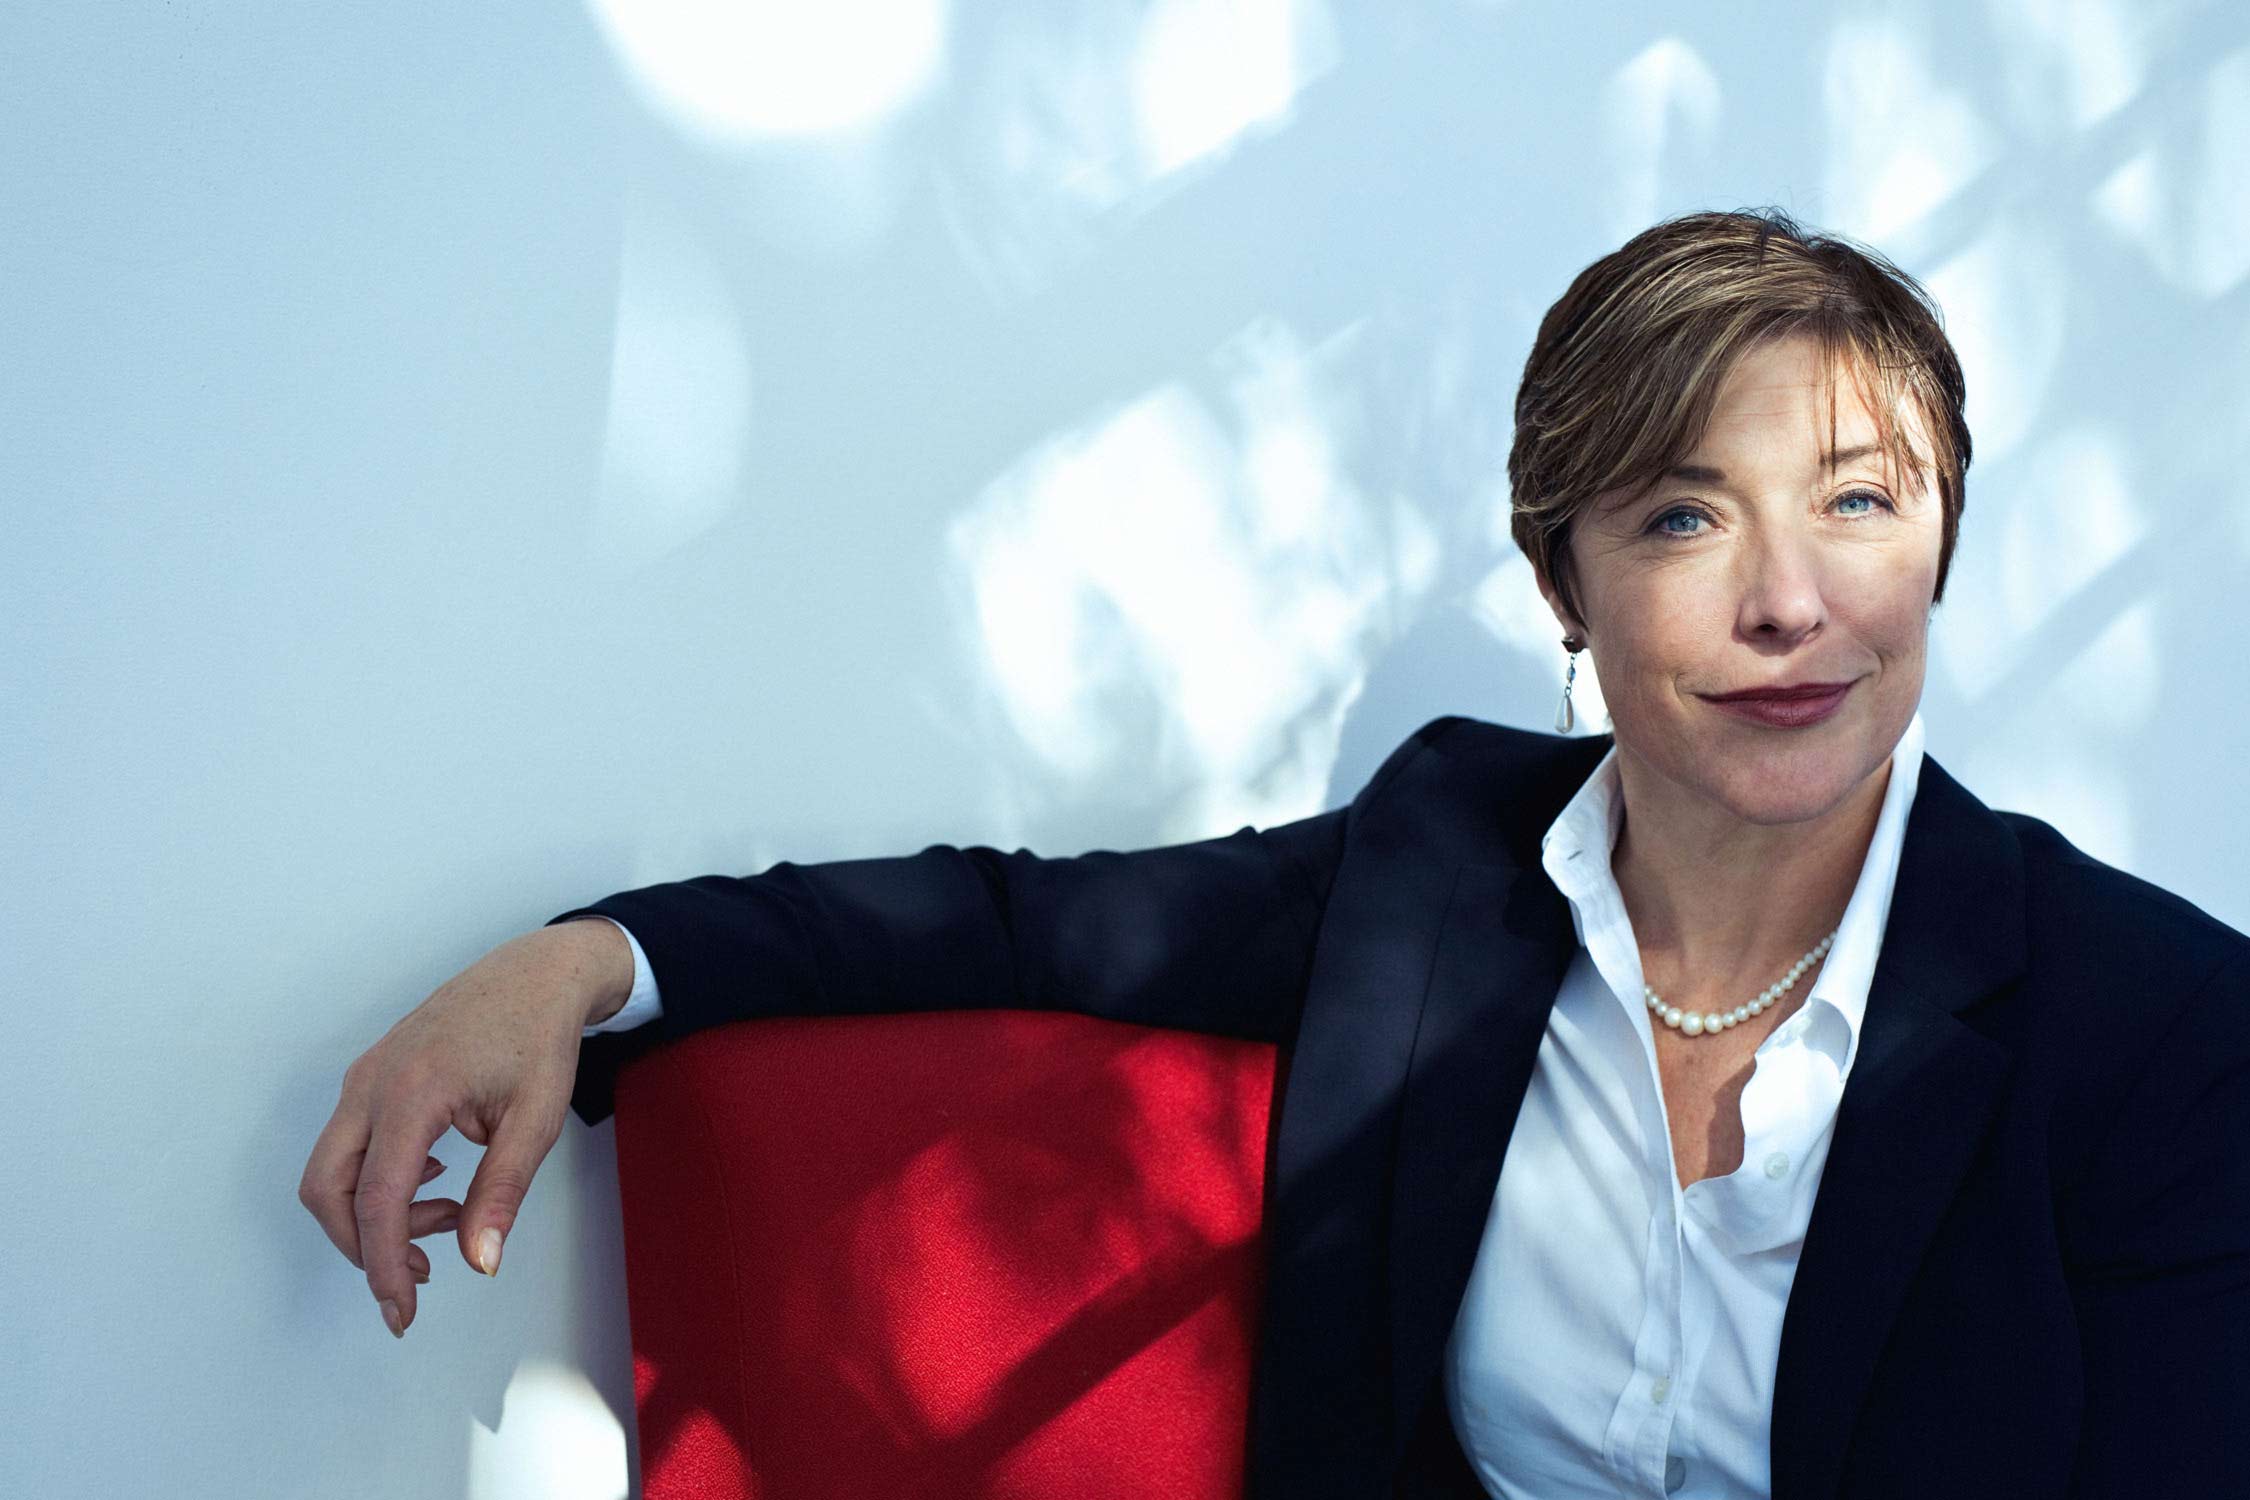 Moody modern corporate portrait of a female CEO sitting on a red seat with light and shade hitting her face and the wall behind.